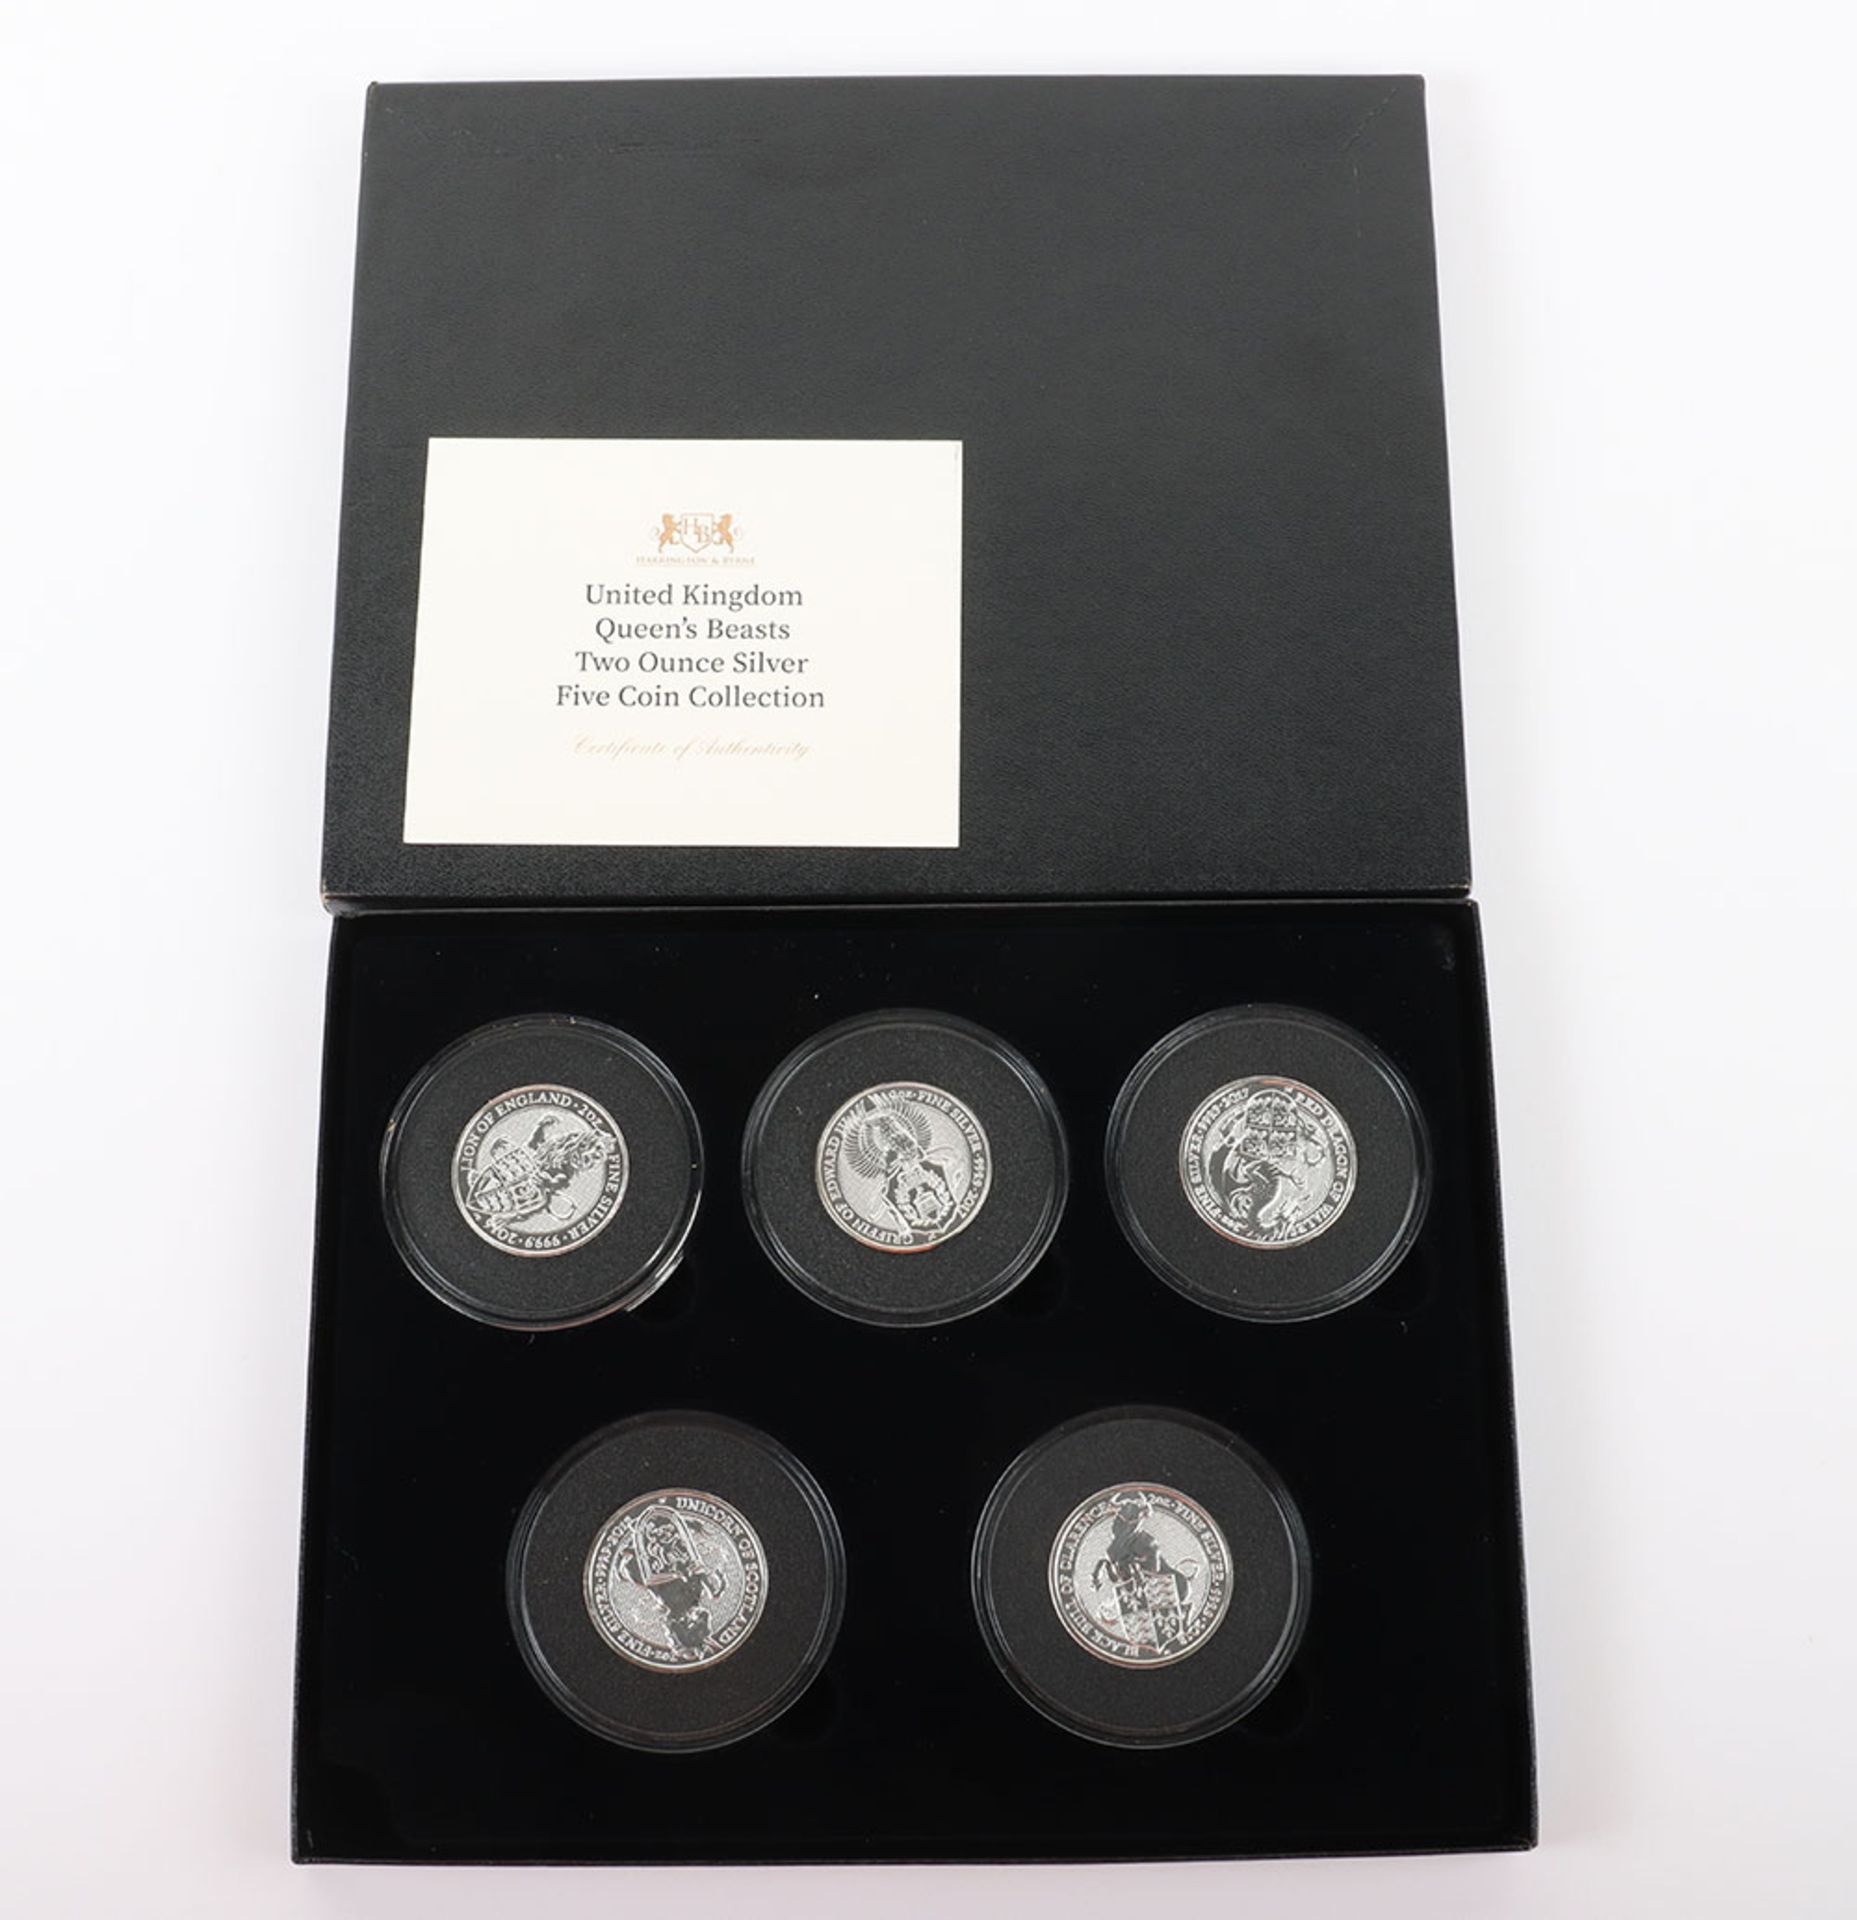 United Kingdom Queen’s Beasts Two Ounce Silver Five Coin Collection